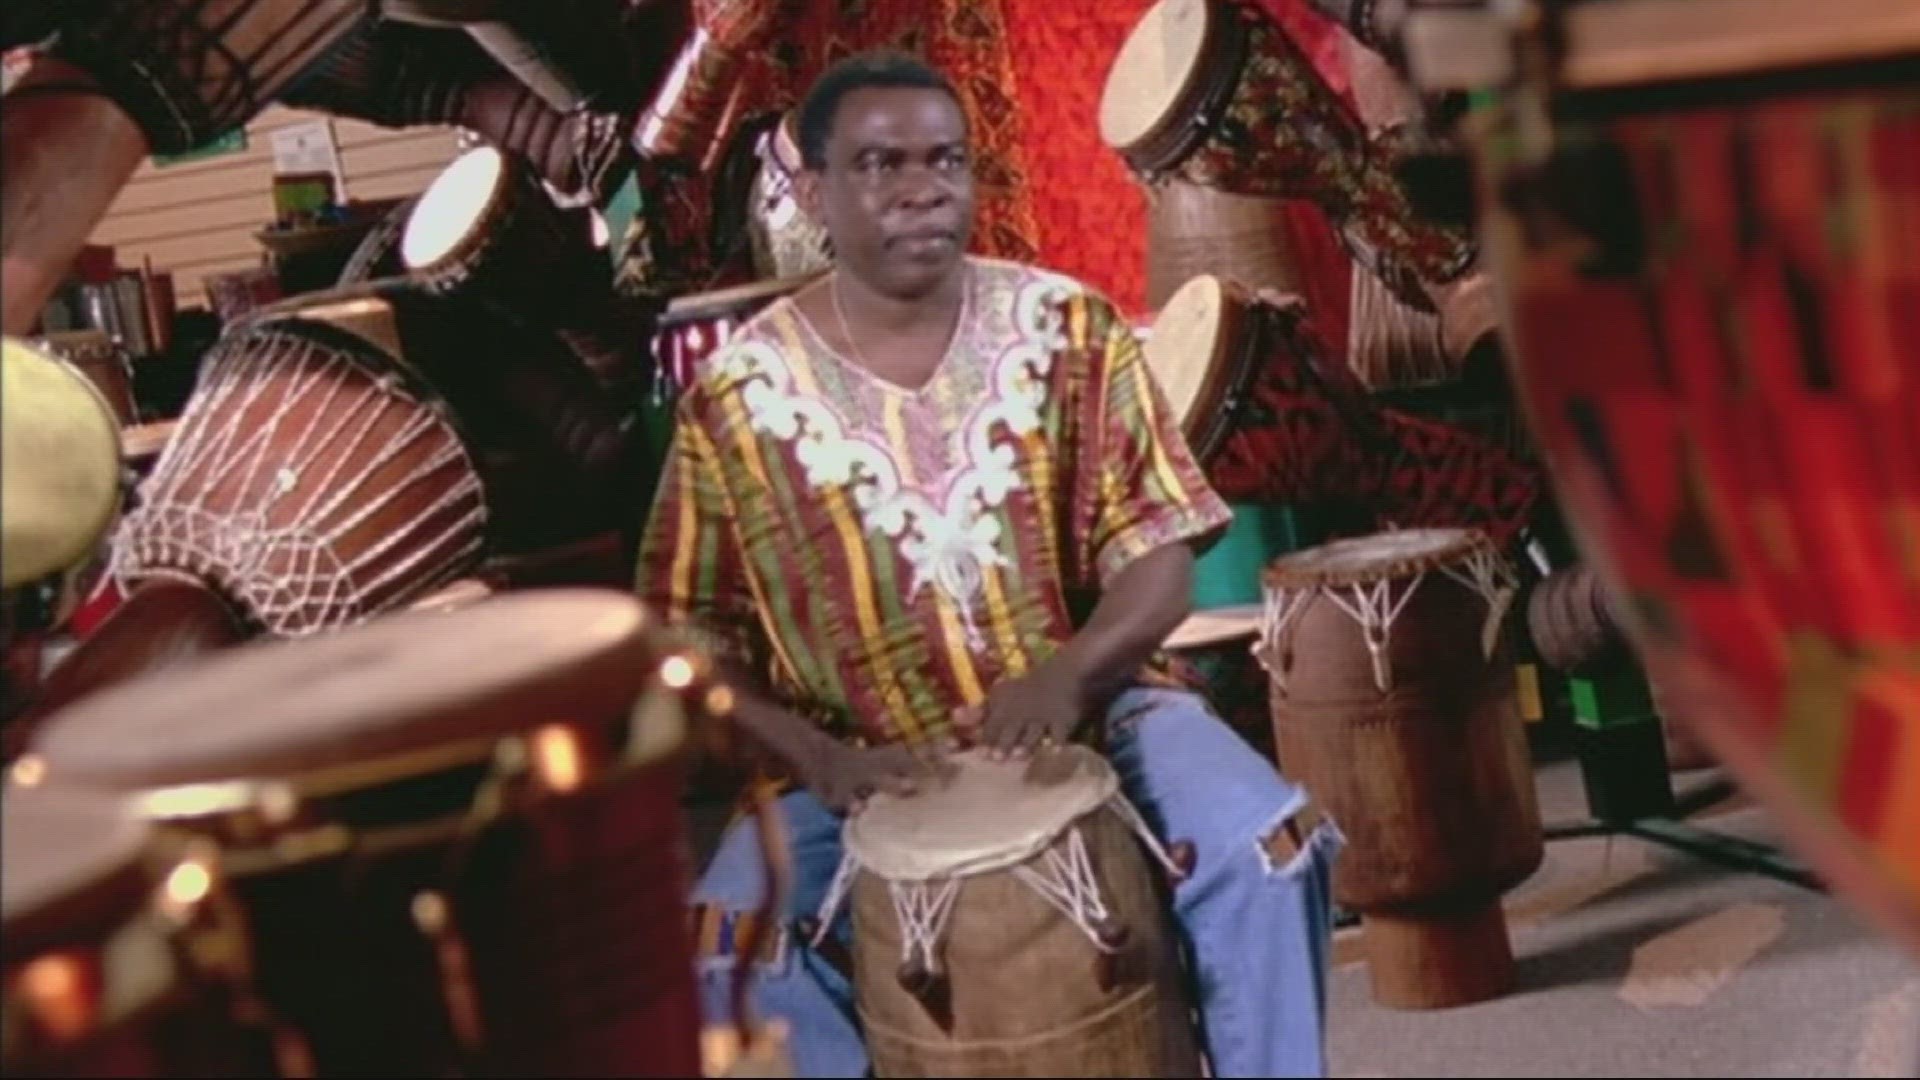 Obo Addy was a Ghanian drummer who was one of the first to fuse African music with Western music. He performed in the 1972 Summer Olympics, then moved to Portland.